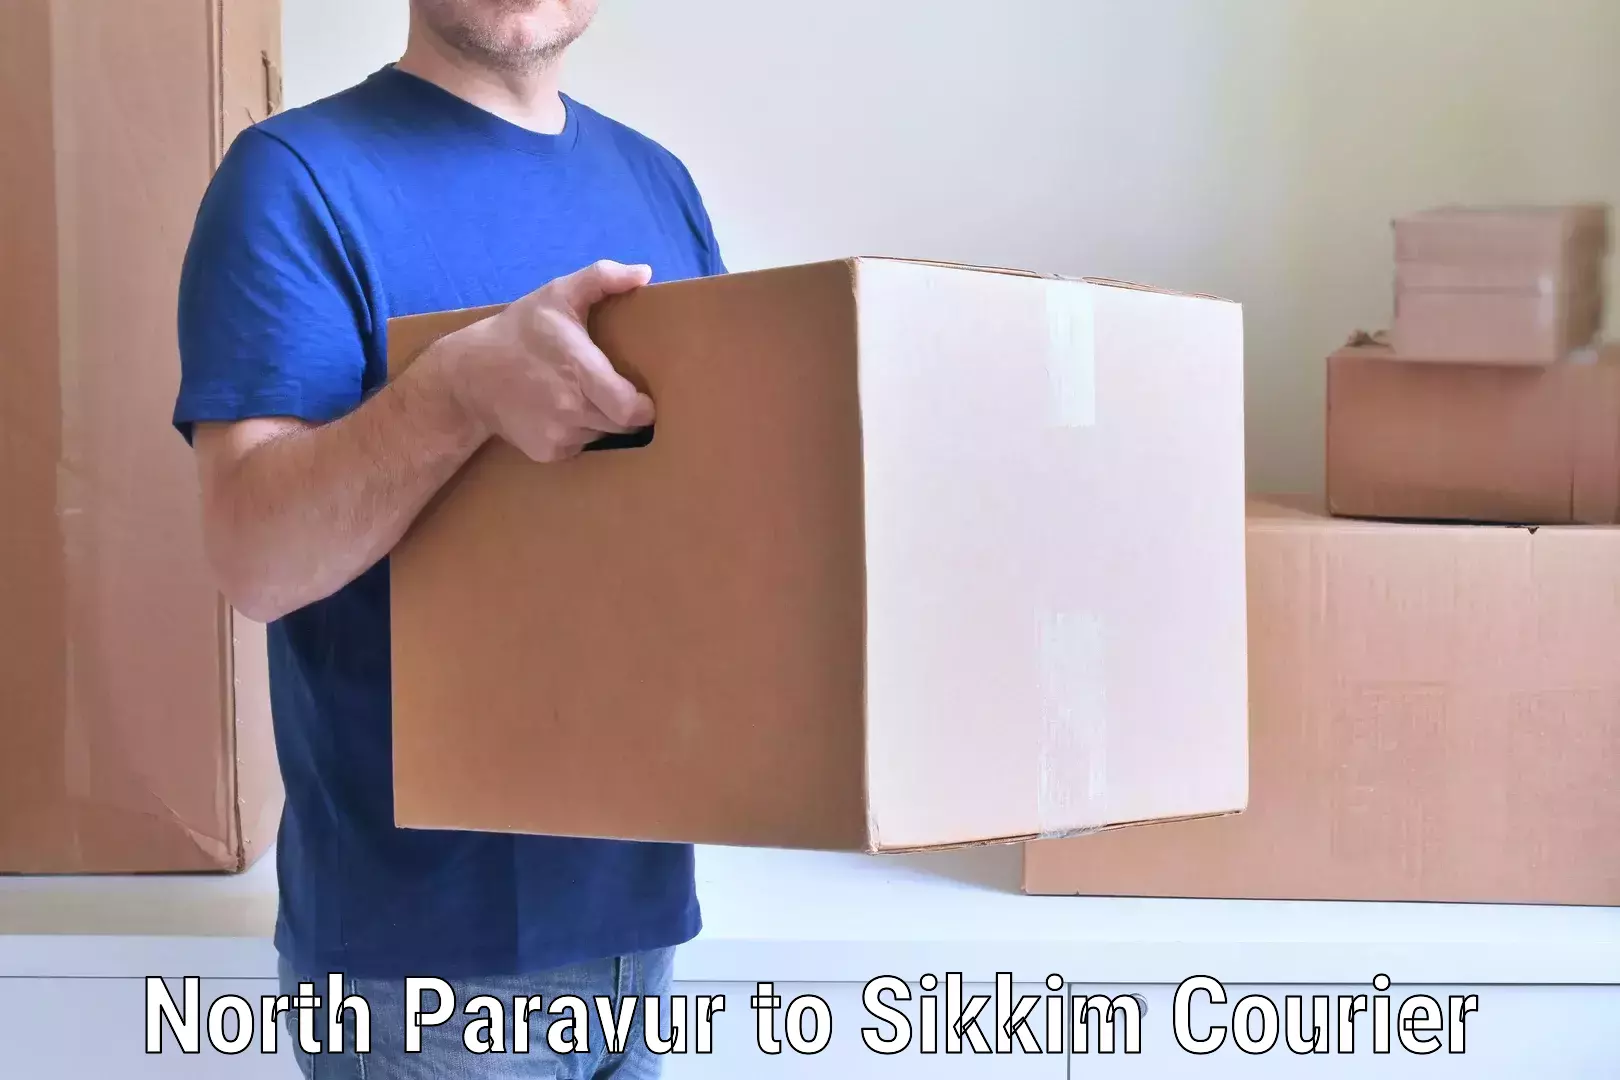 Trusted relocation experts North Paravur to Sikkim